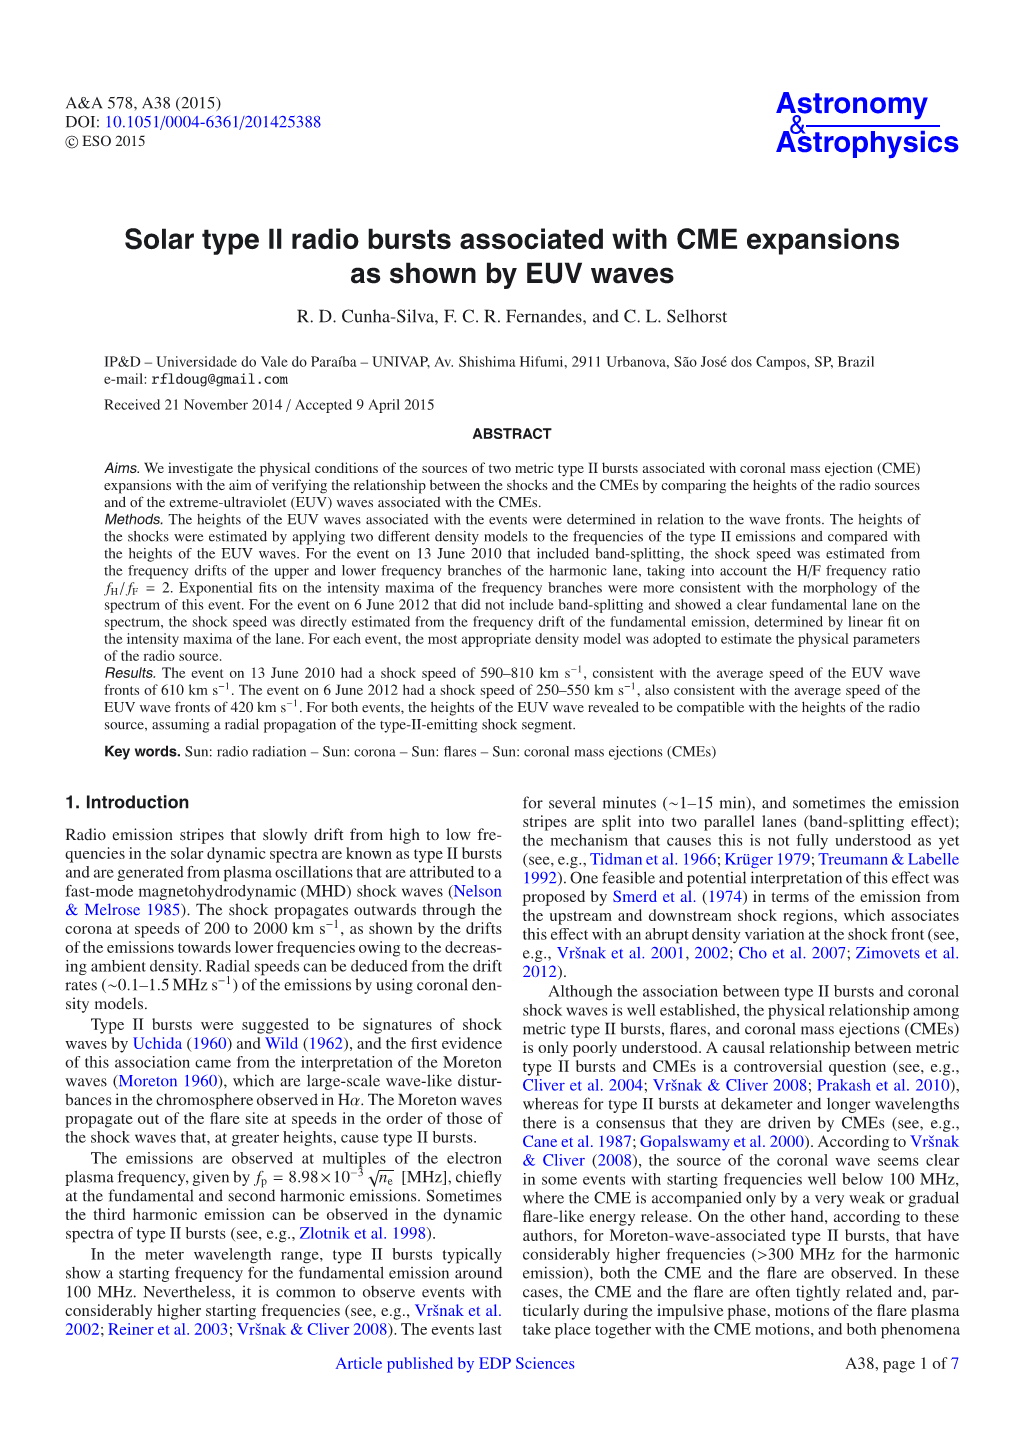 Solar Type II Radio Bursts Associated with CME Expansions As Shown by EUV Waves